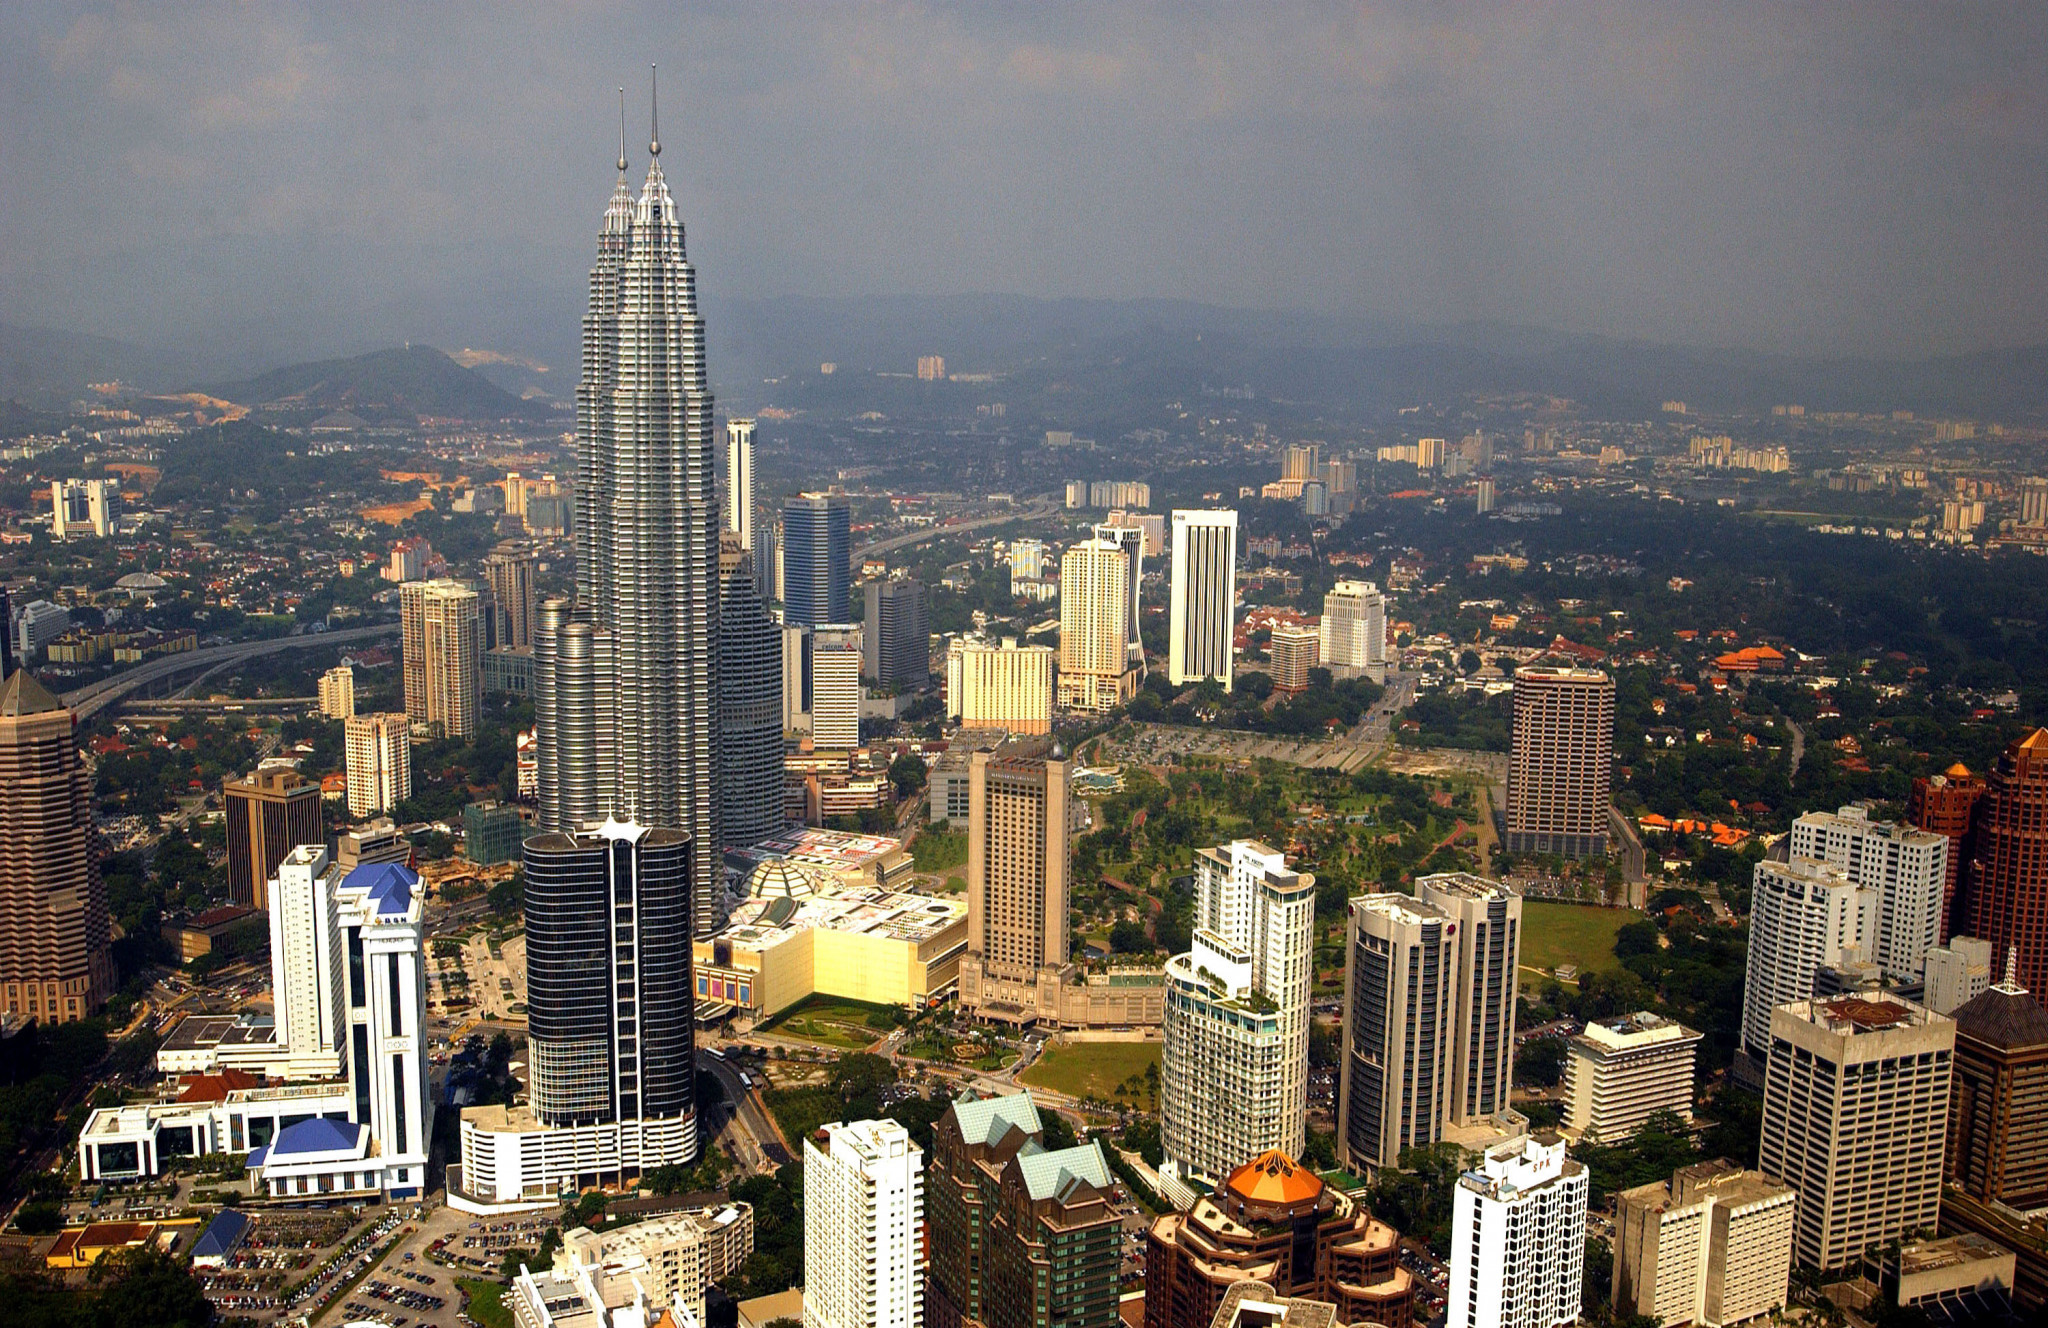 OCM's headquarters are situated in Kuala Lumpur ©Getty Images